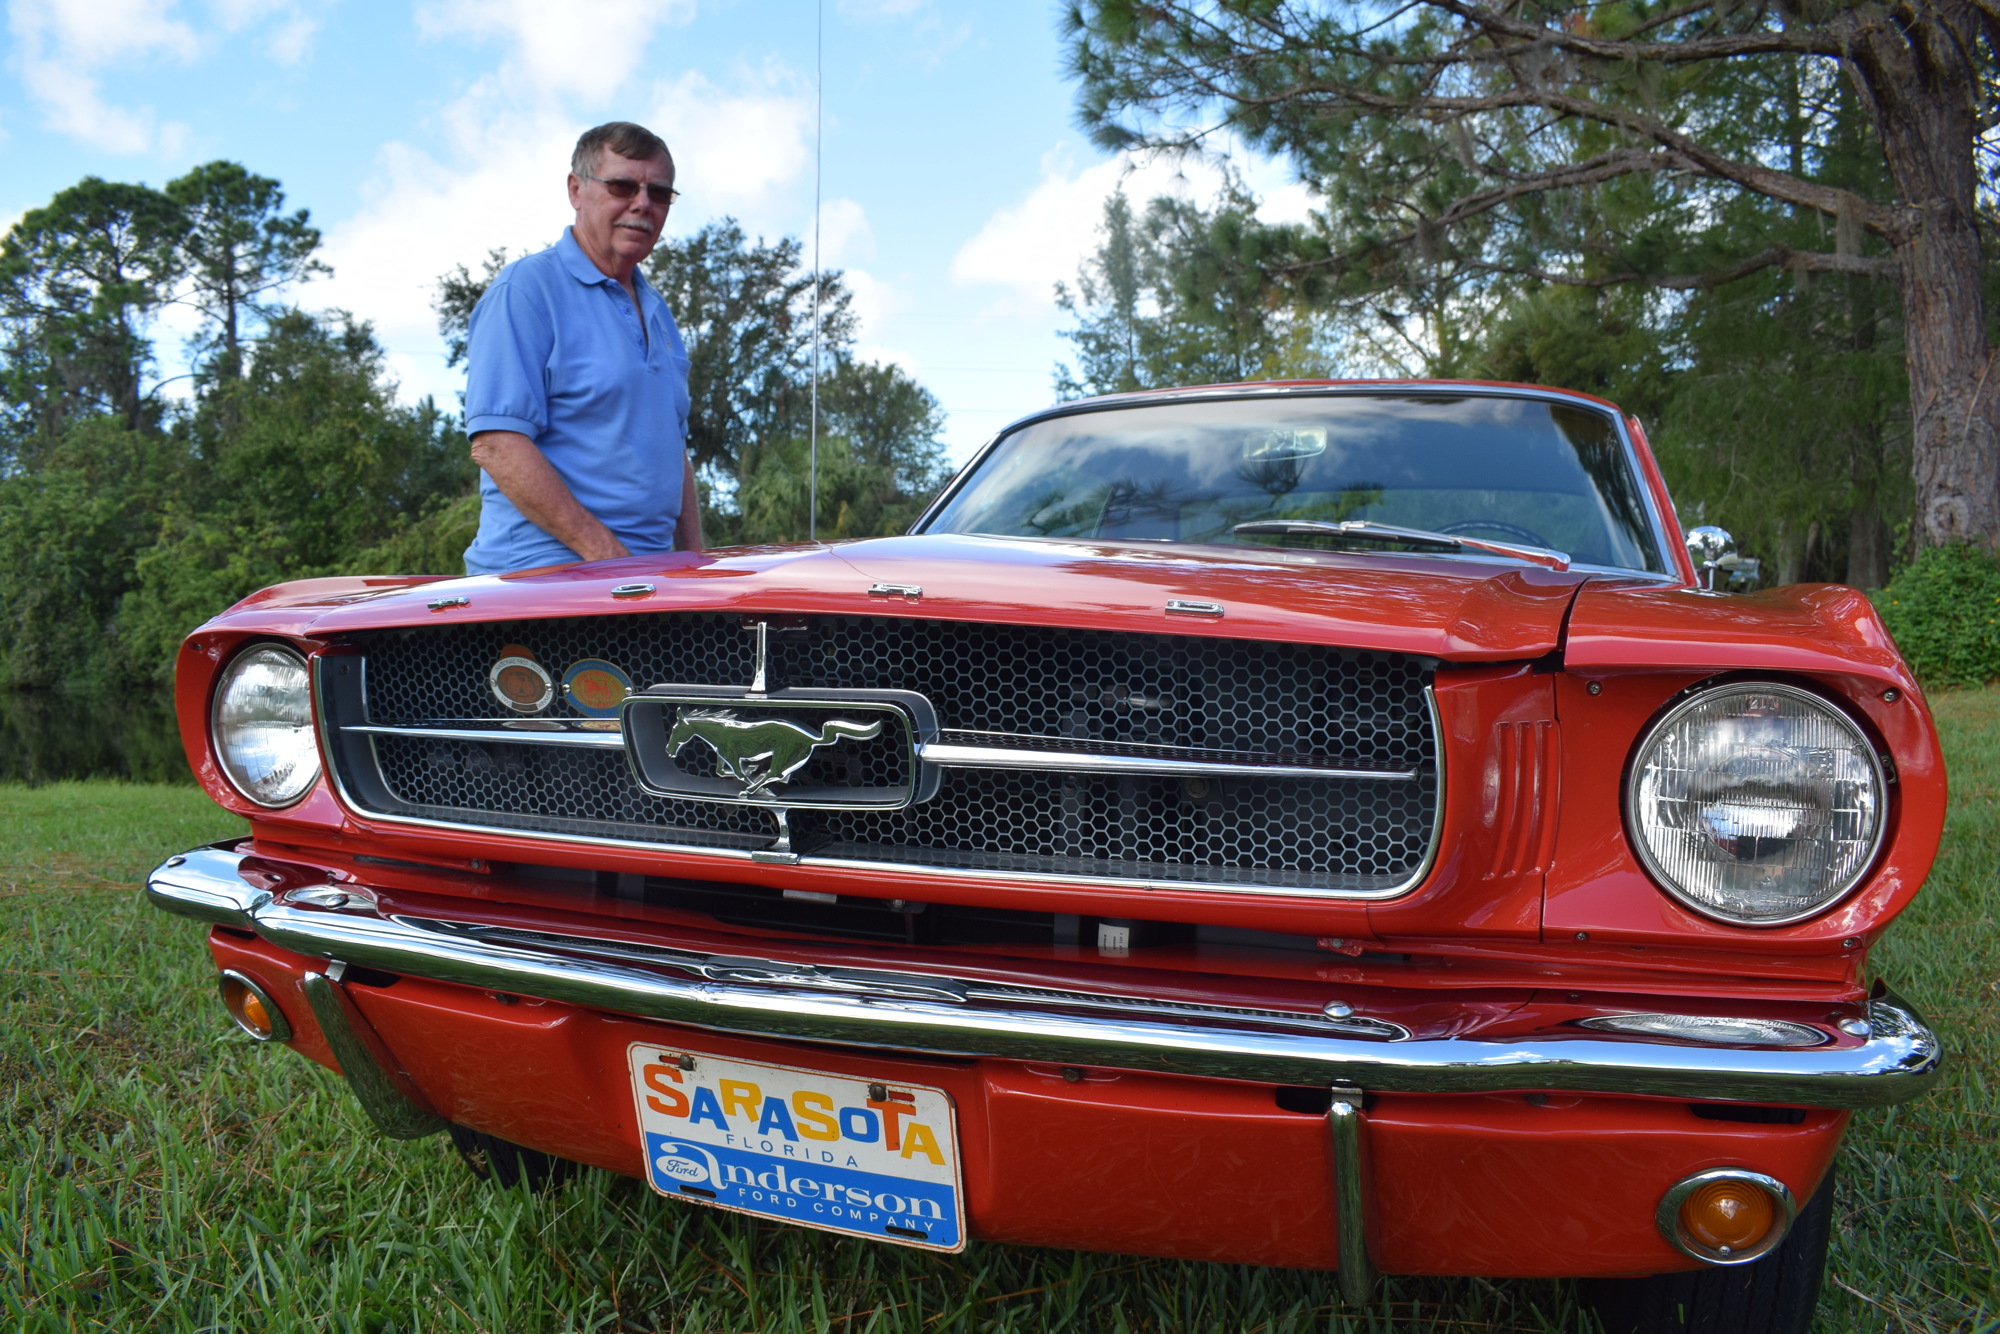 Ray Baker first saw his 1964 1/2 Mustang when he was 13 years old and his uncle owned the car. (Photo by Jay Heater)